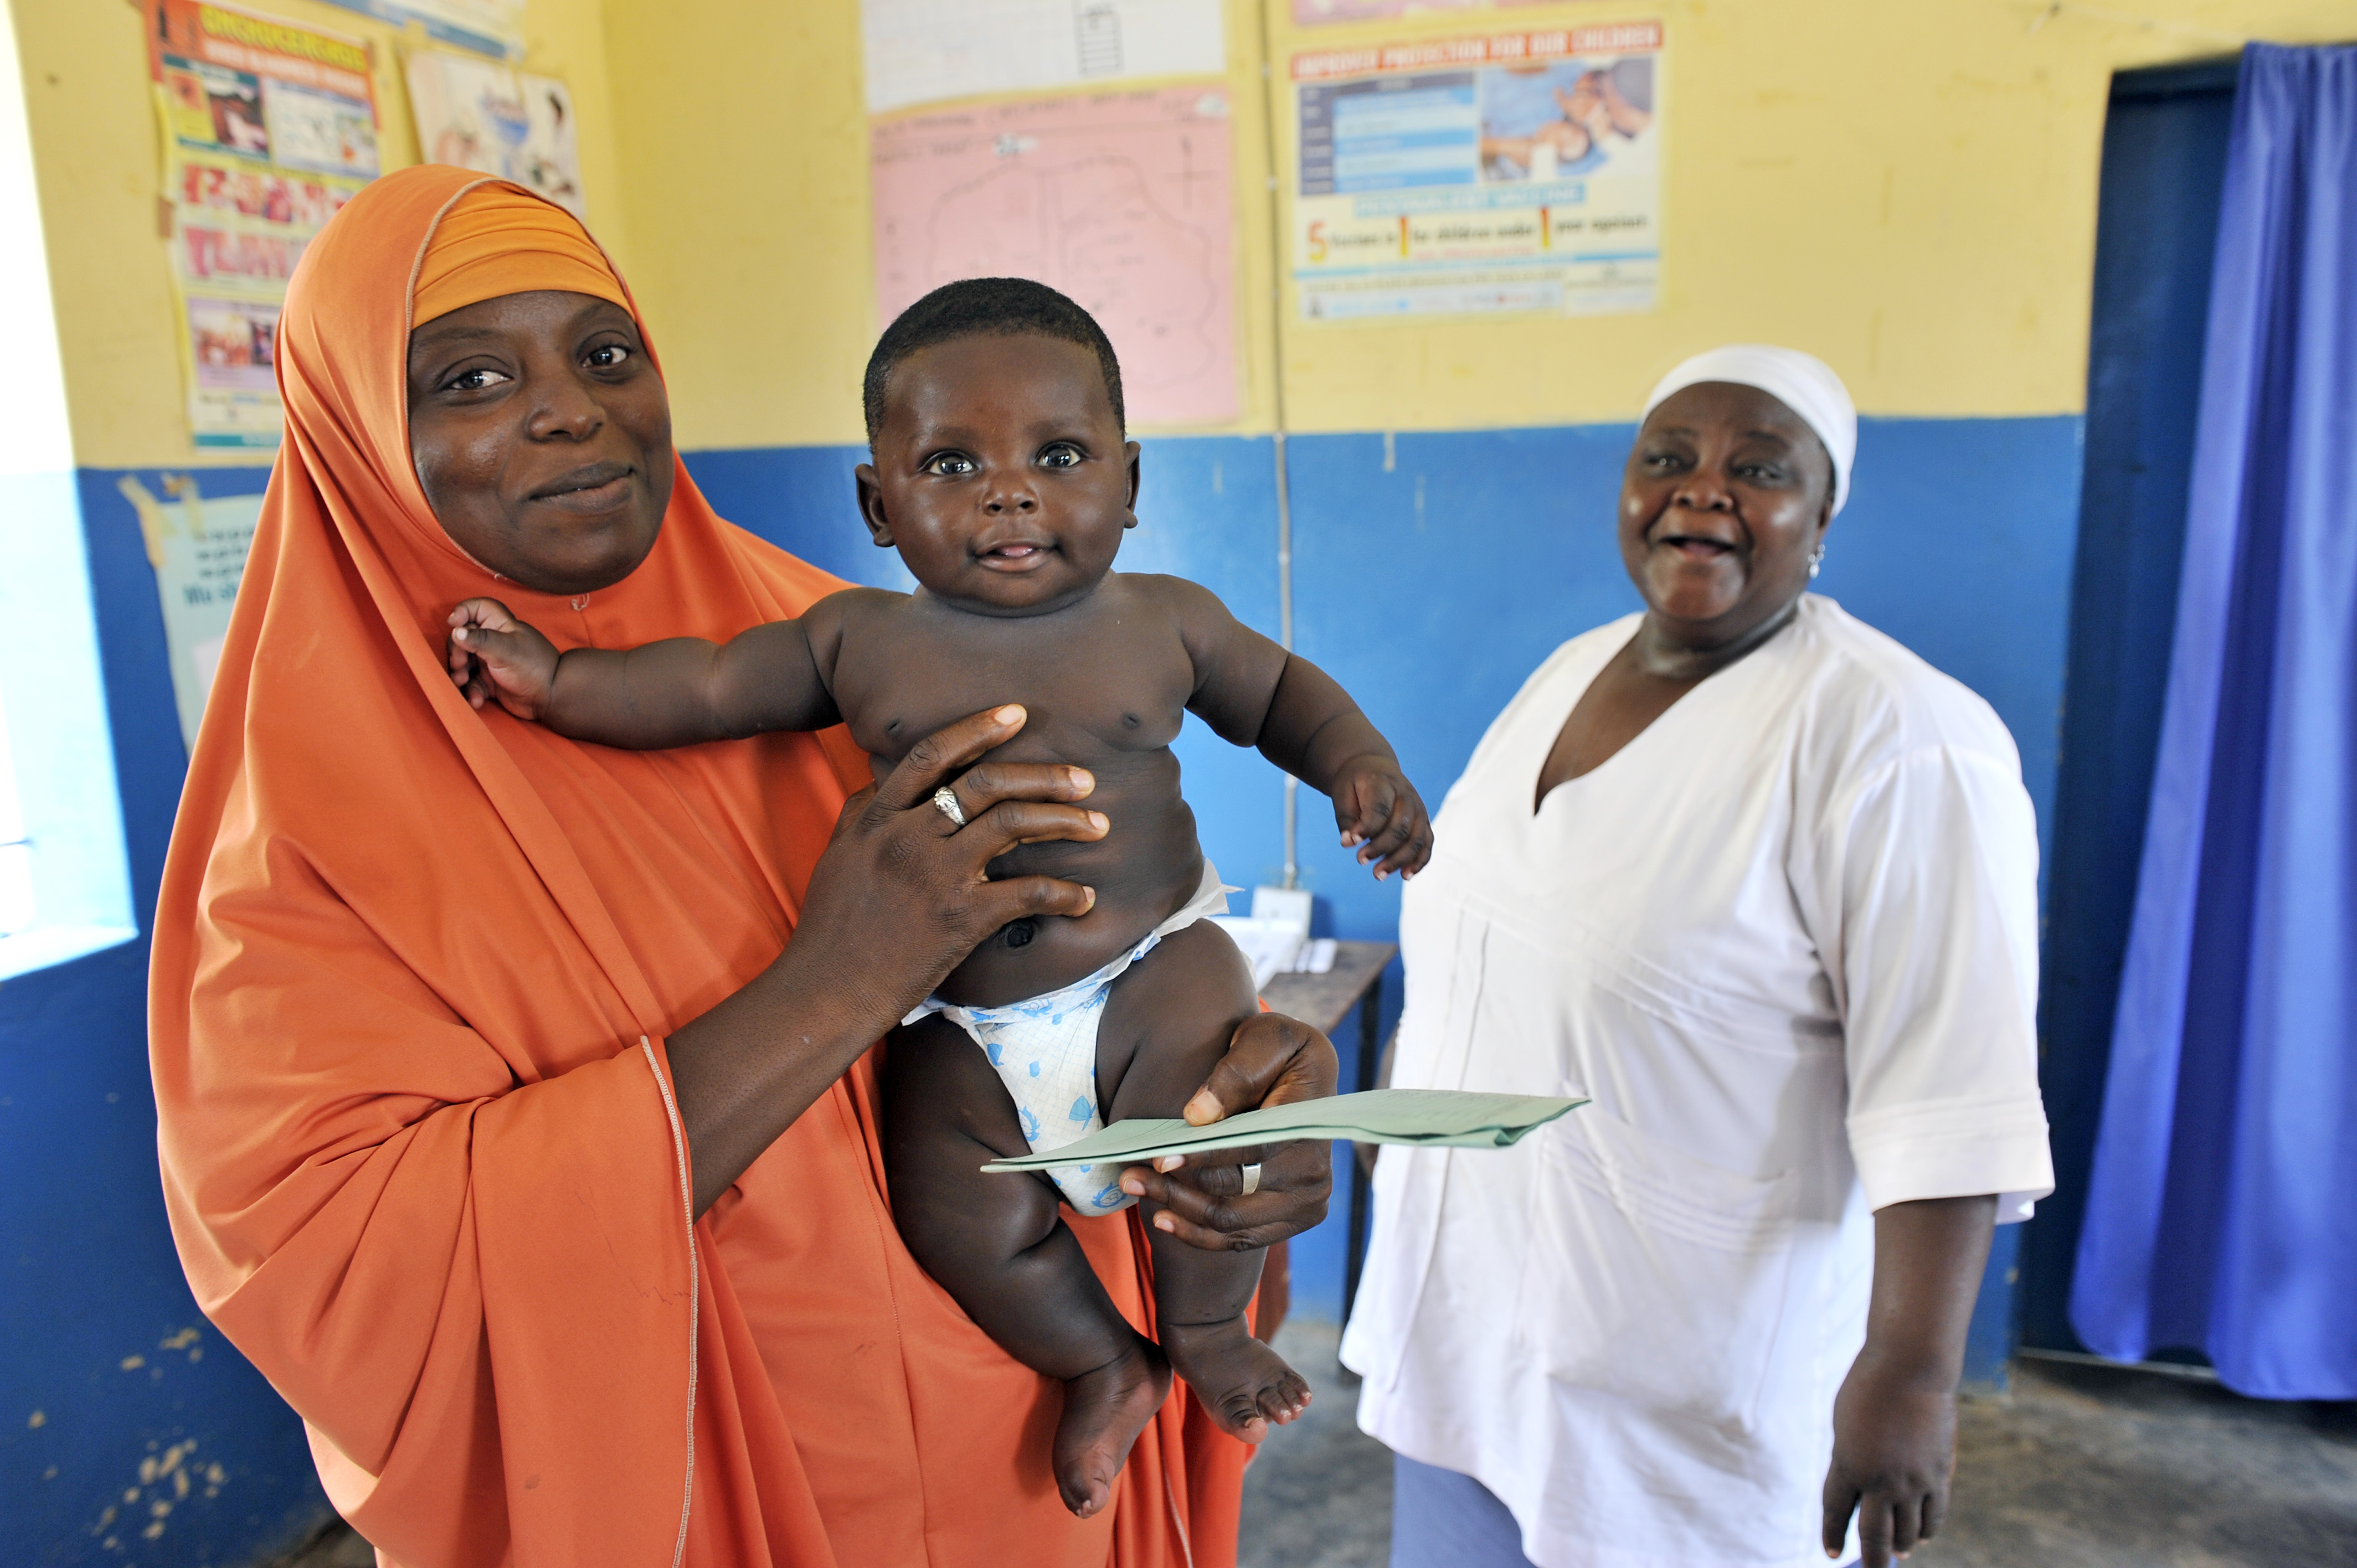 A mother in Nigeria holds her infant in a clinical setting. A nurse looks on, smiling, in the background.